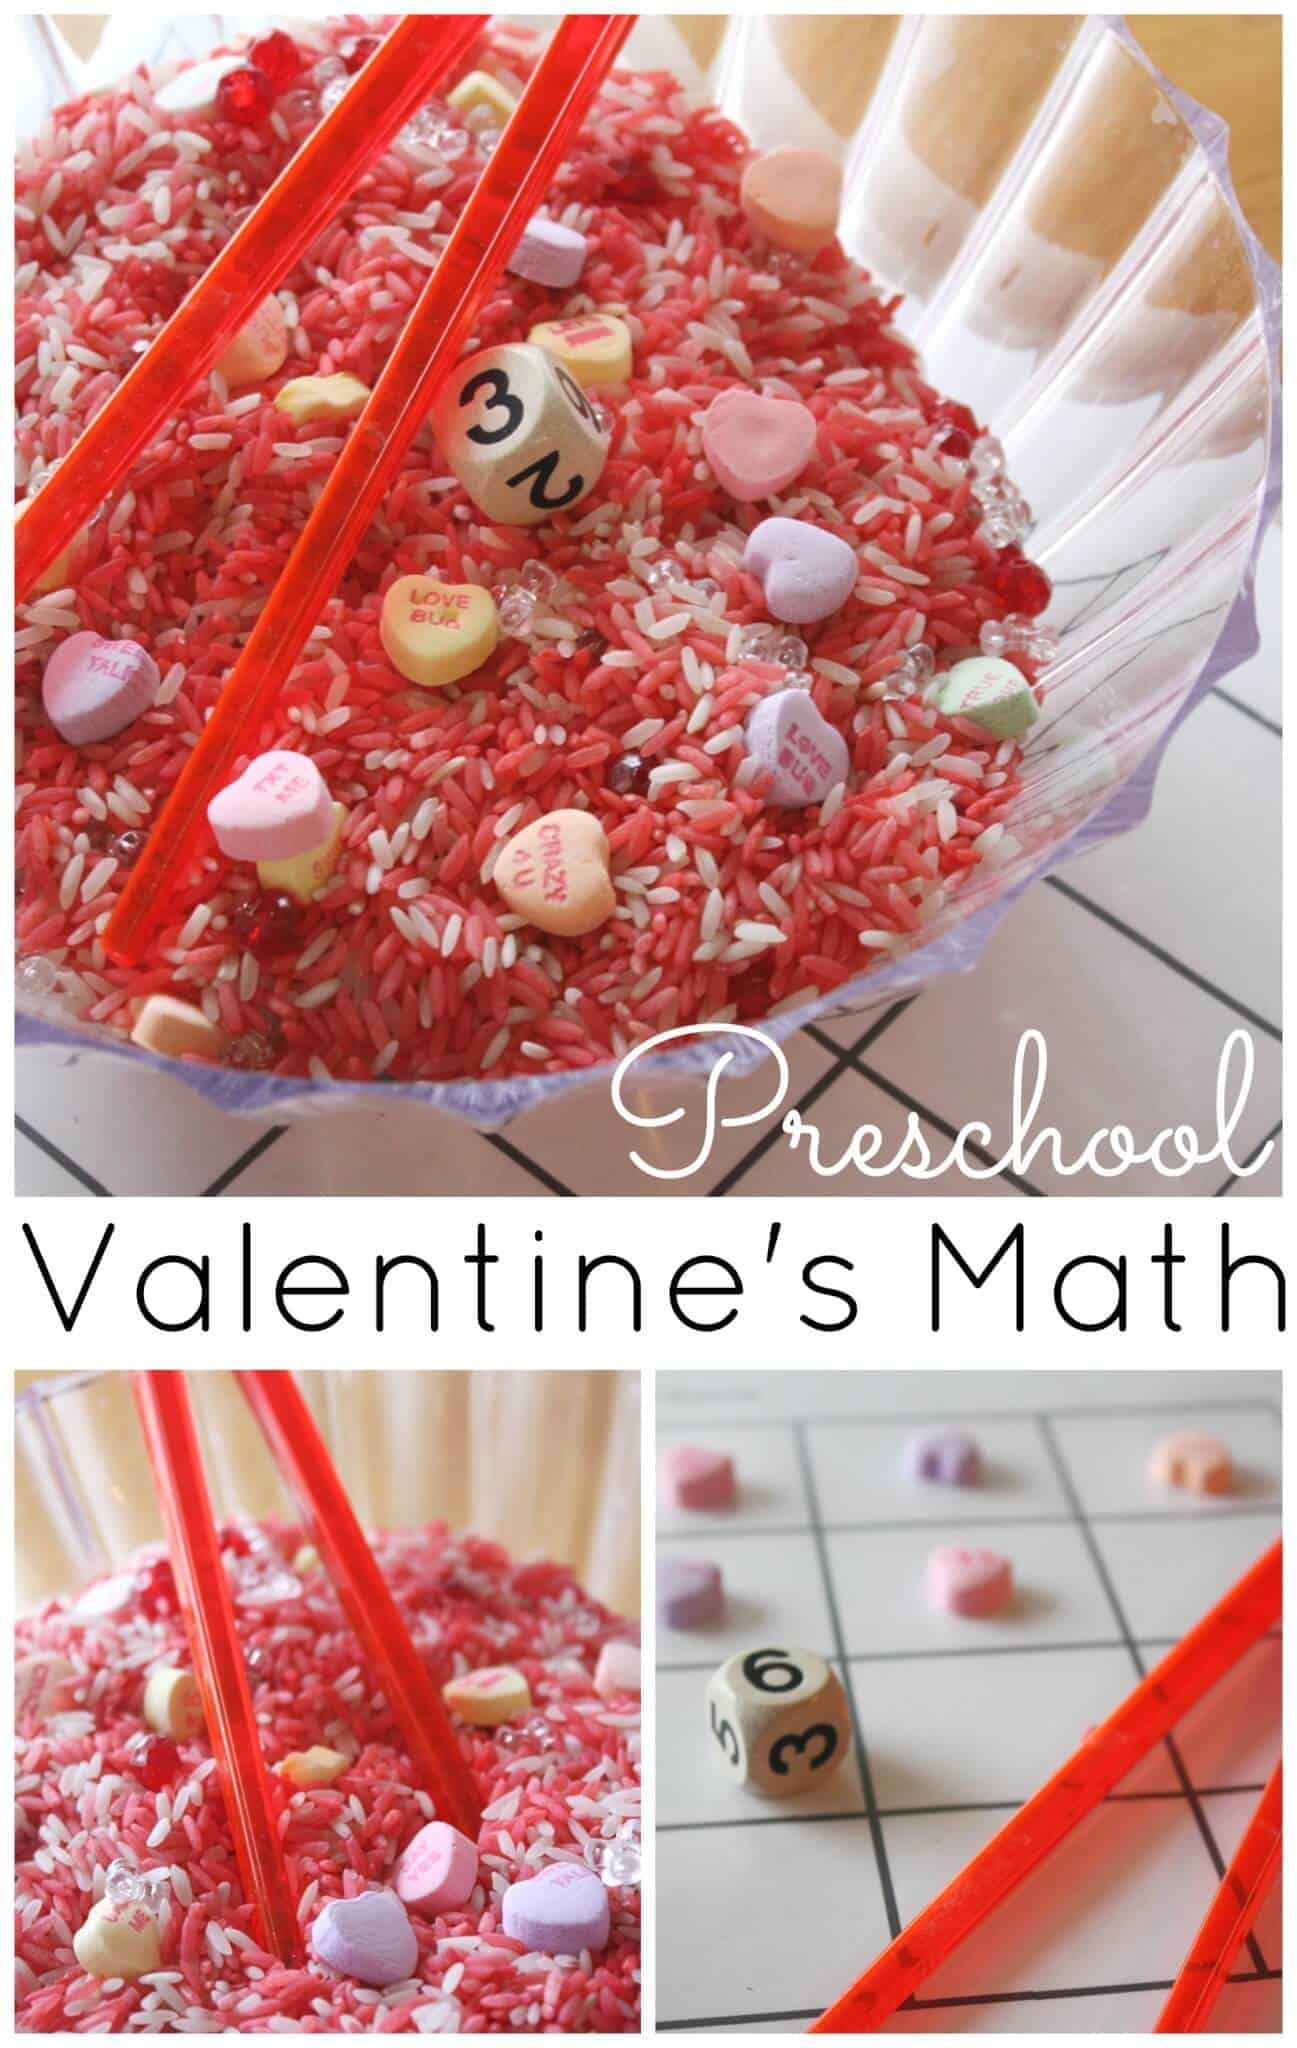 Valentines Day Events Ideas
 Candy Hearts Activities and Science Ideas for Valentine s Days